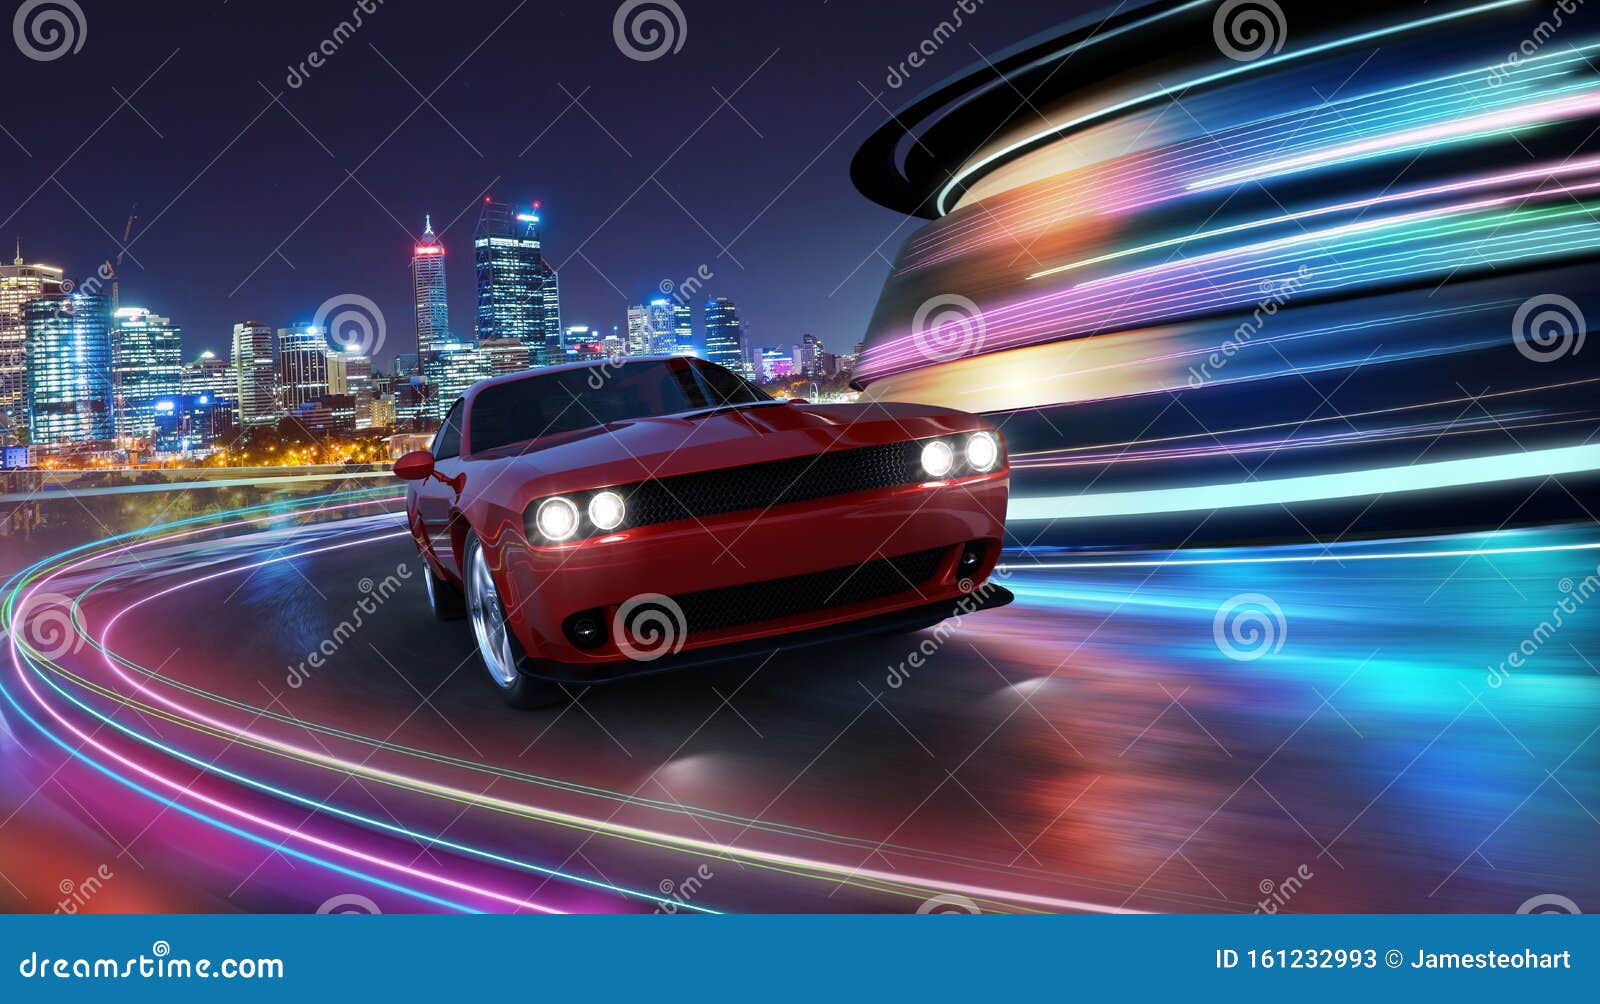 high speed generic red sports car driving in the city